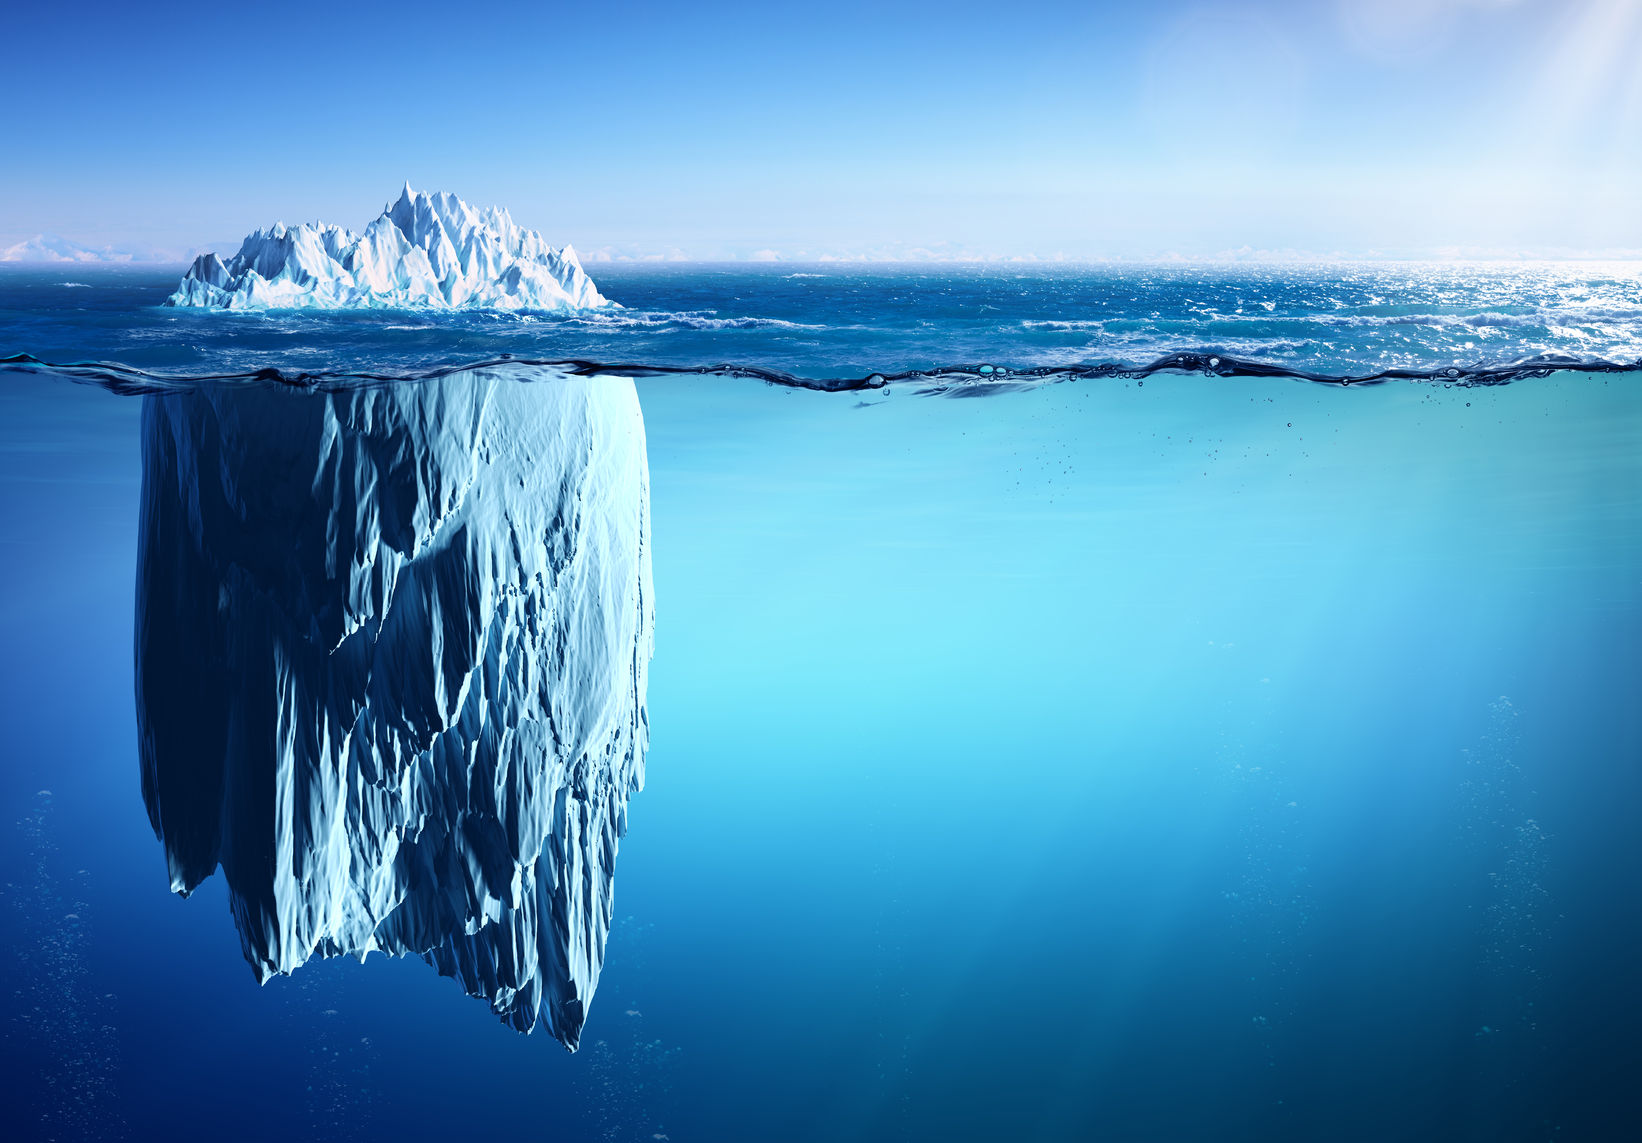 77391653 - iceberg floating on sea - appearance and global warming concept